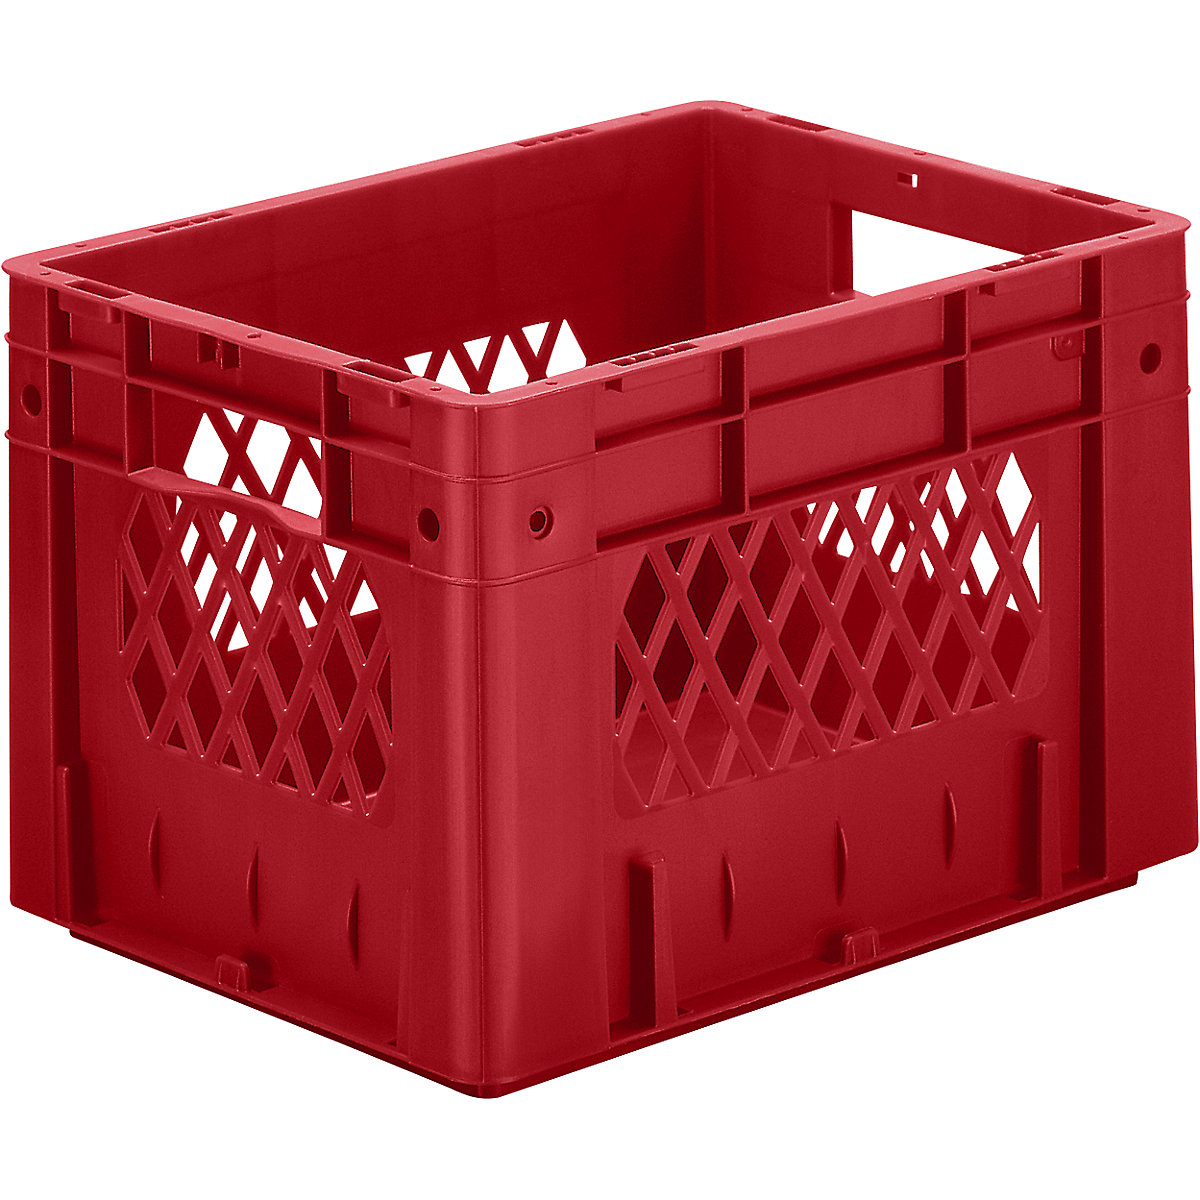 Heavy duty Euro container, polypropylene, capacity 23.3 l, LxWxH 400 x 300 x 270 mm, perforated walls, solid base, red, pack of 4-4